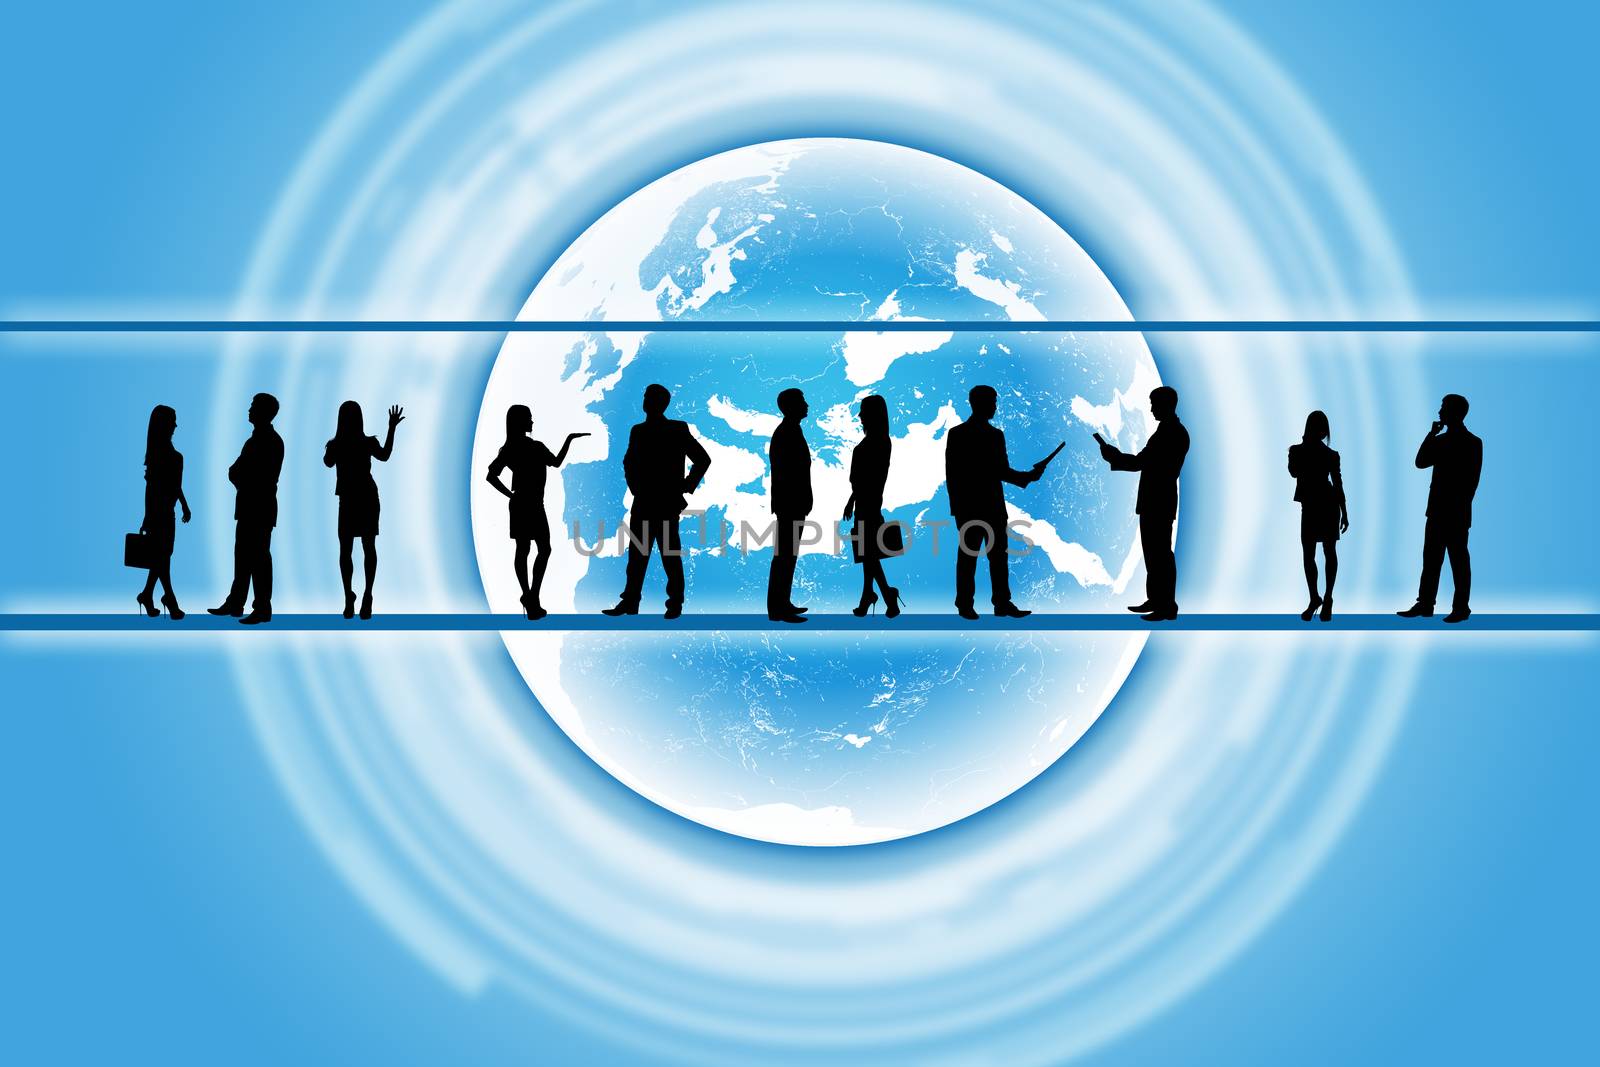 Silhouettes of business people standing in different postures on abstract background with earth. Elements of this image furnished by NASA